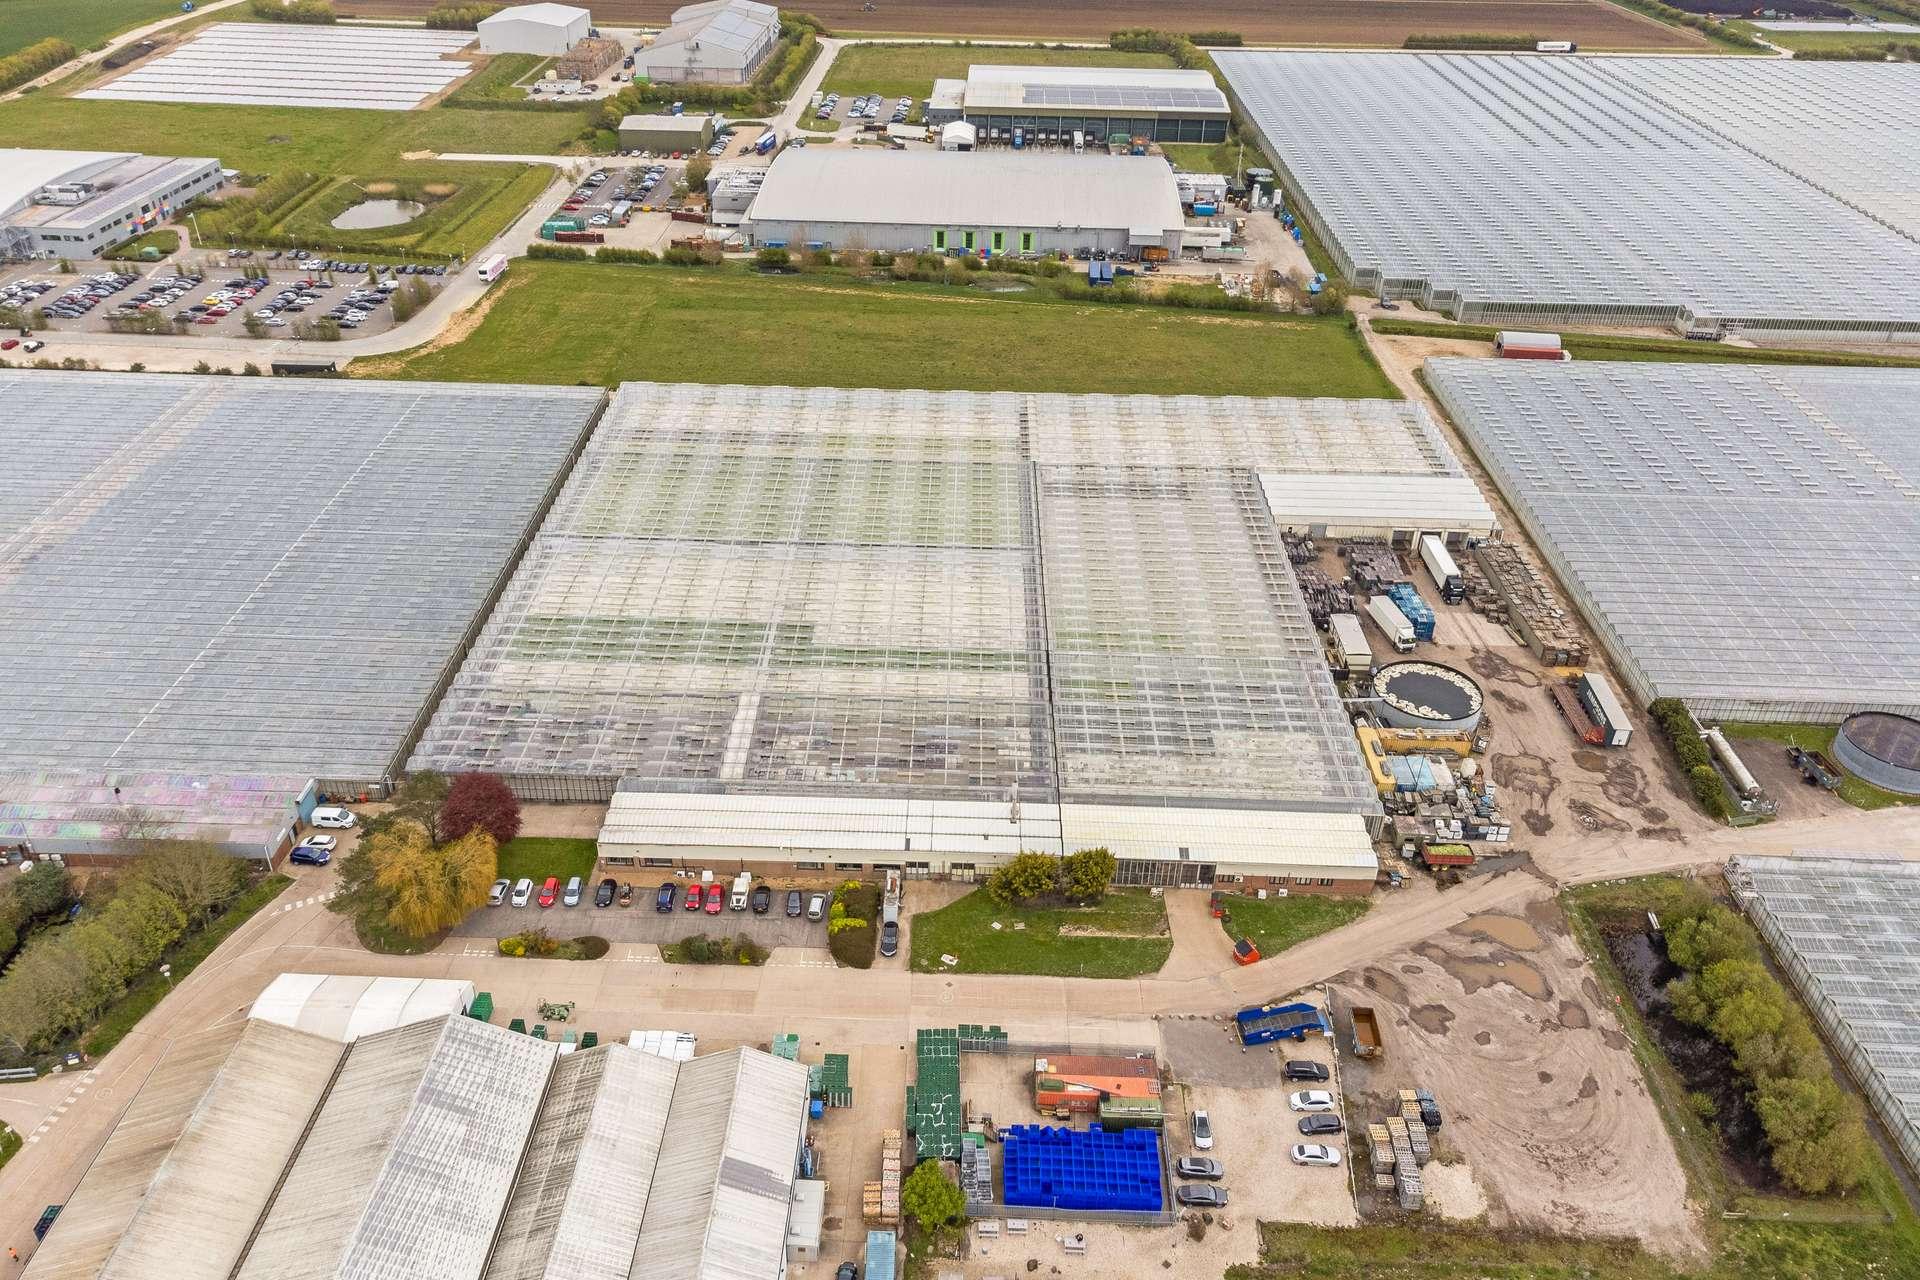 Chichester hydroponic nursery sold out of administration after 11 months